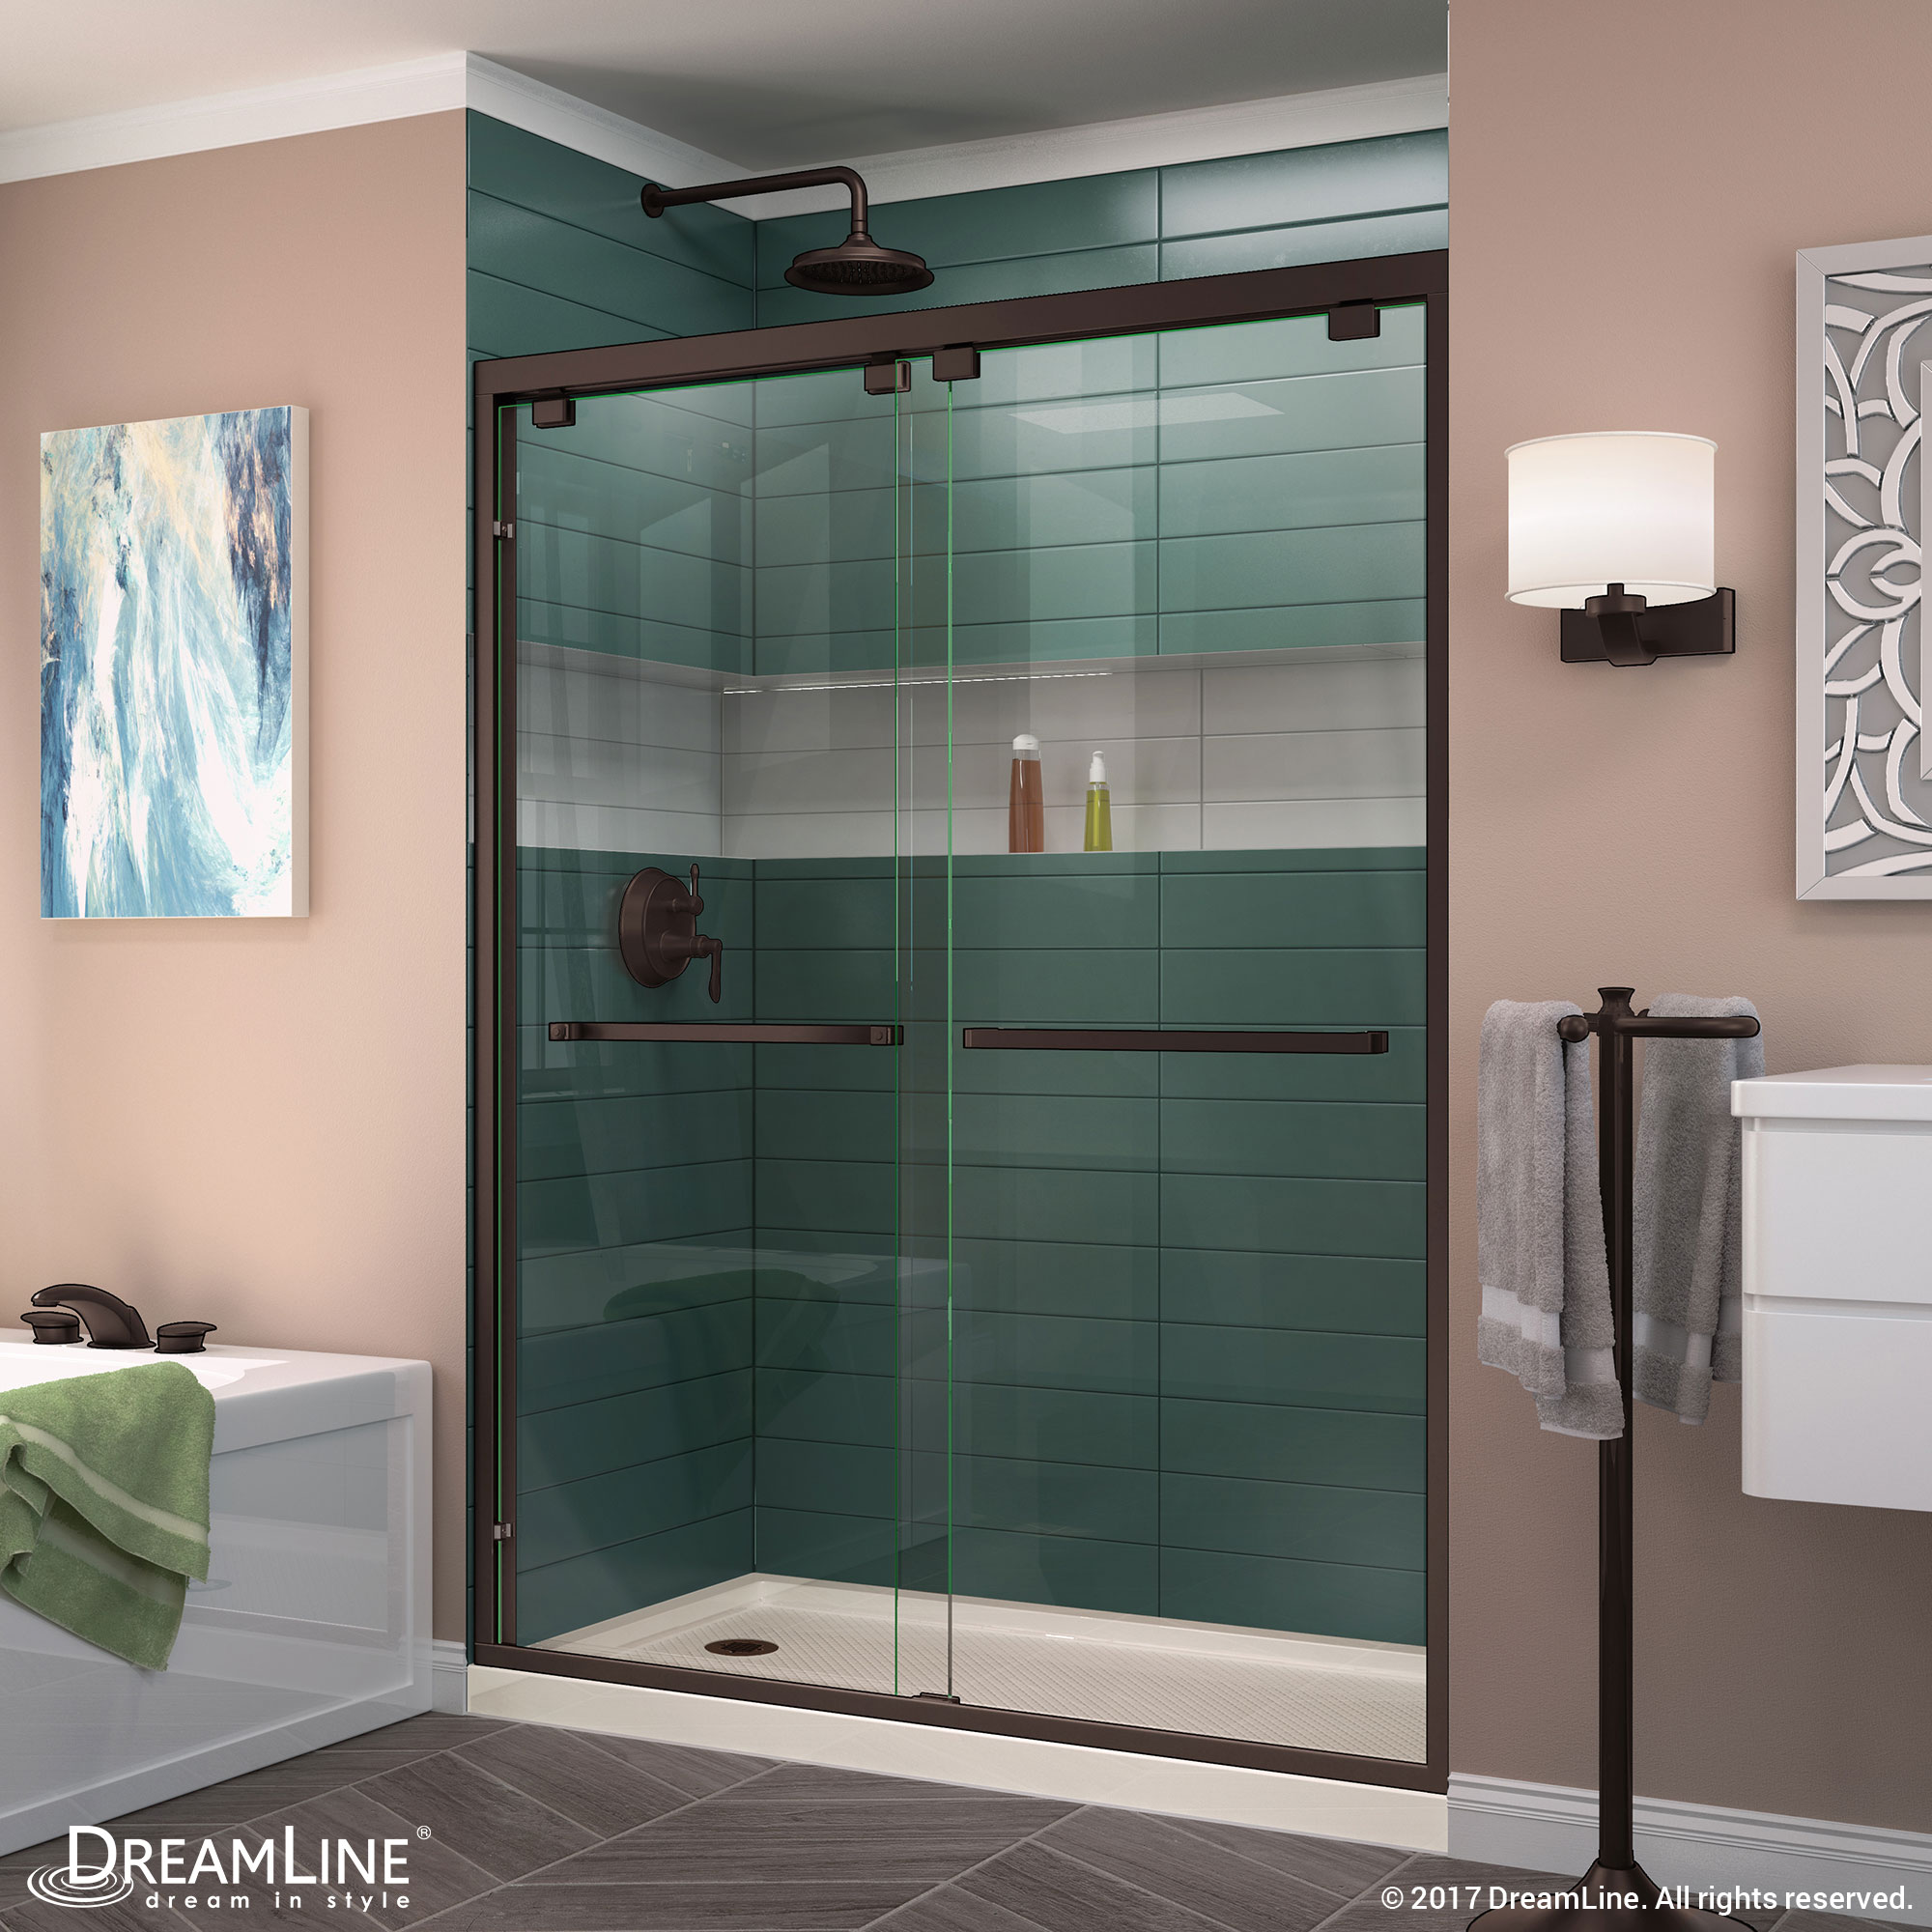 DreamLine Encore 36 in. D x 60 in. W x 78 3/4 in. H Bypass Shower Door in Brushed Nickel and Left Drain Biscuit Base Kit